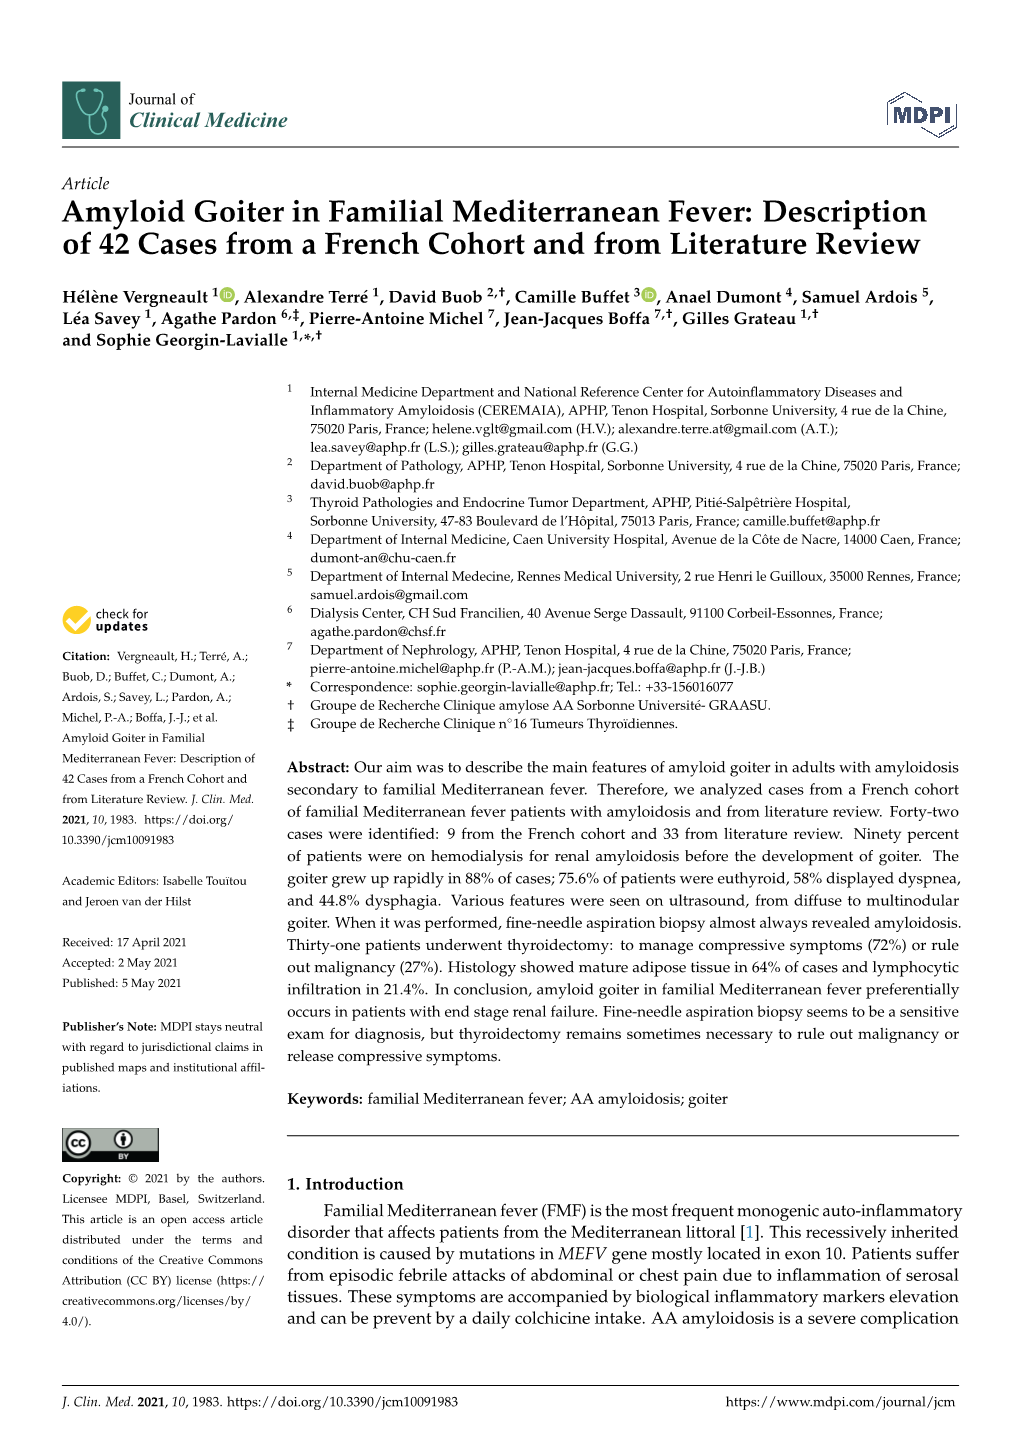 Amyloid Goiter in Familial Mediterranean Fever: Description of 42 Cases from a French Cohort and from Literature Review